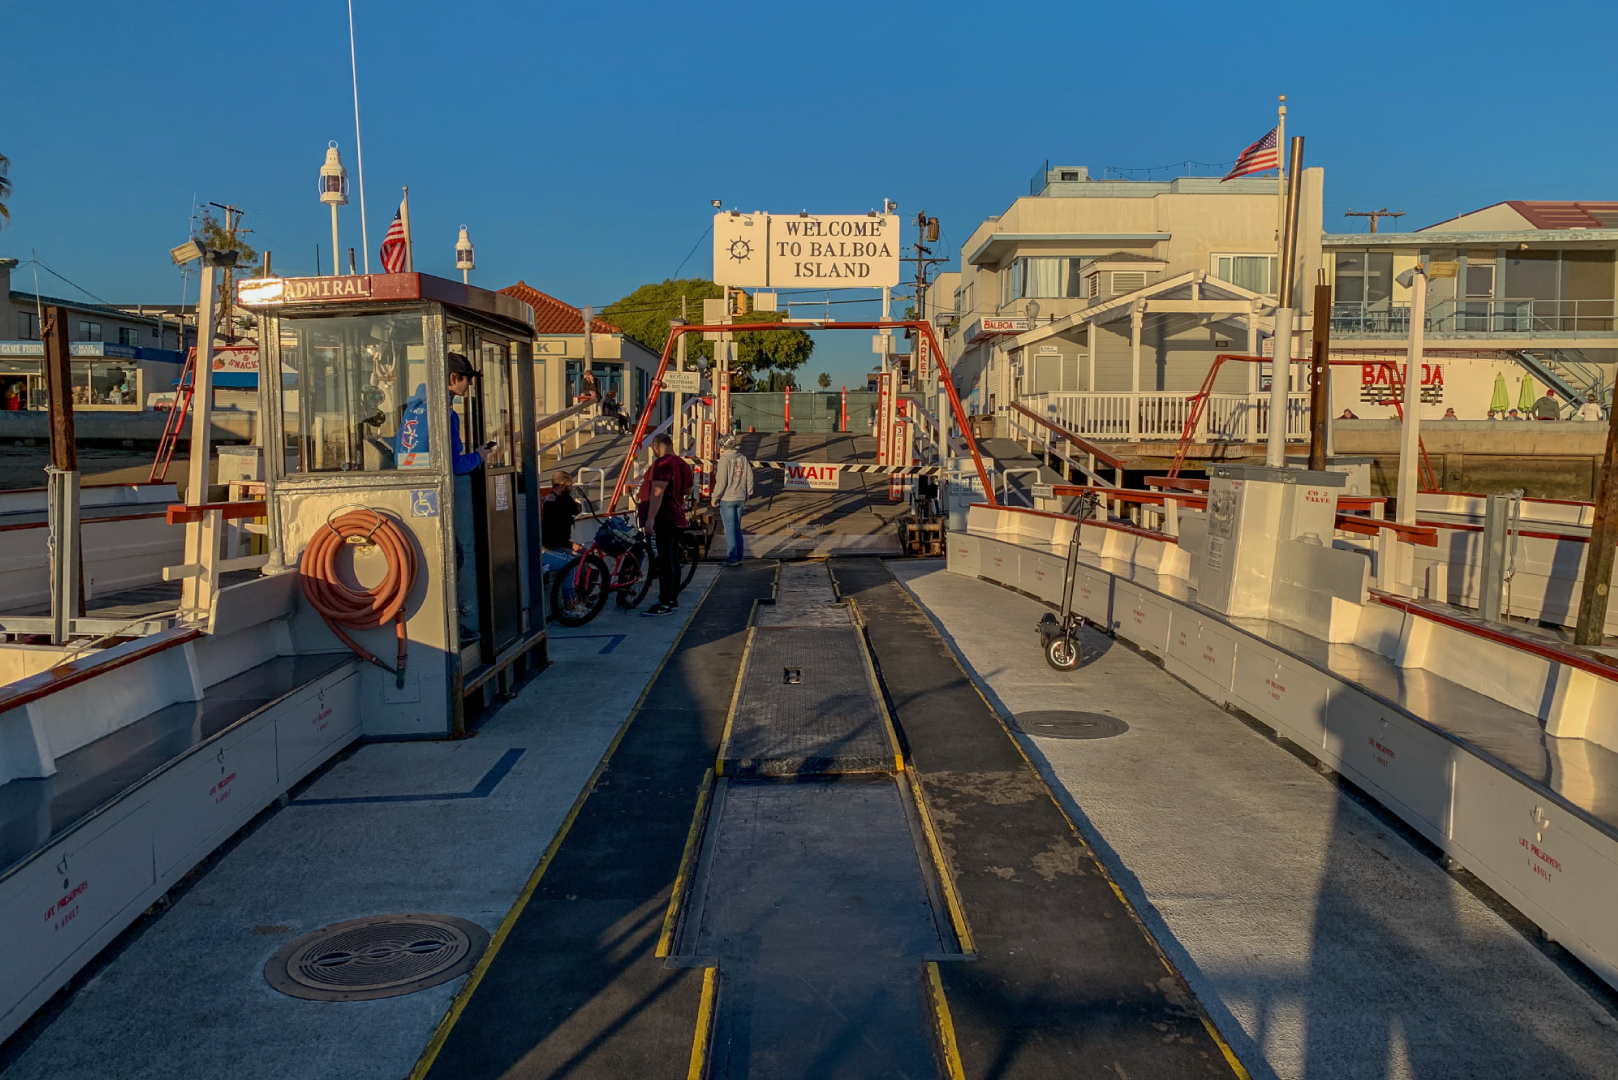 A view of the Balboa ferry arriving at Balboa Island